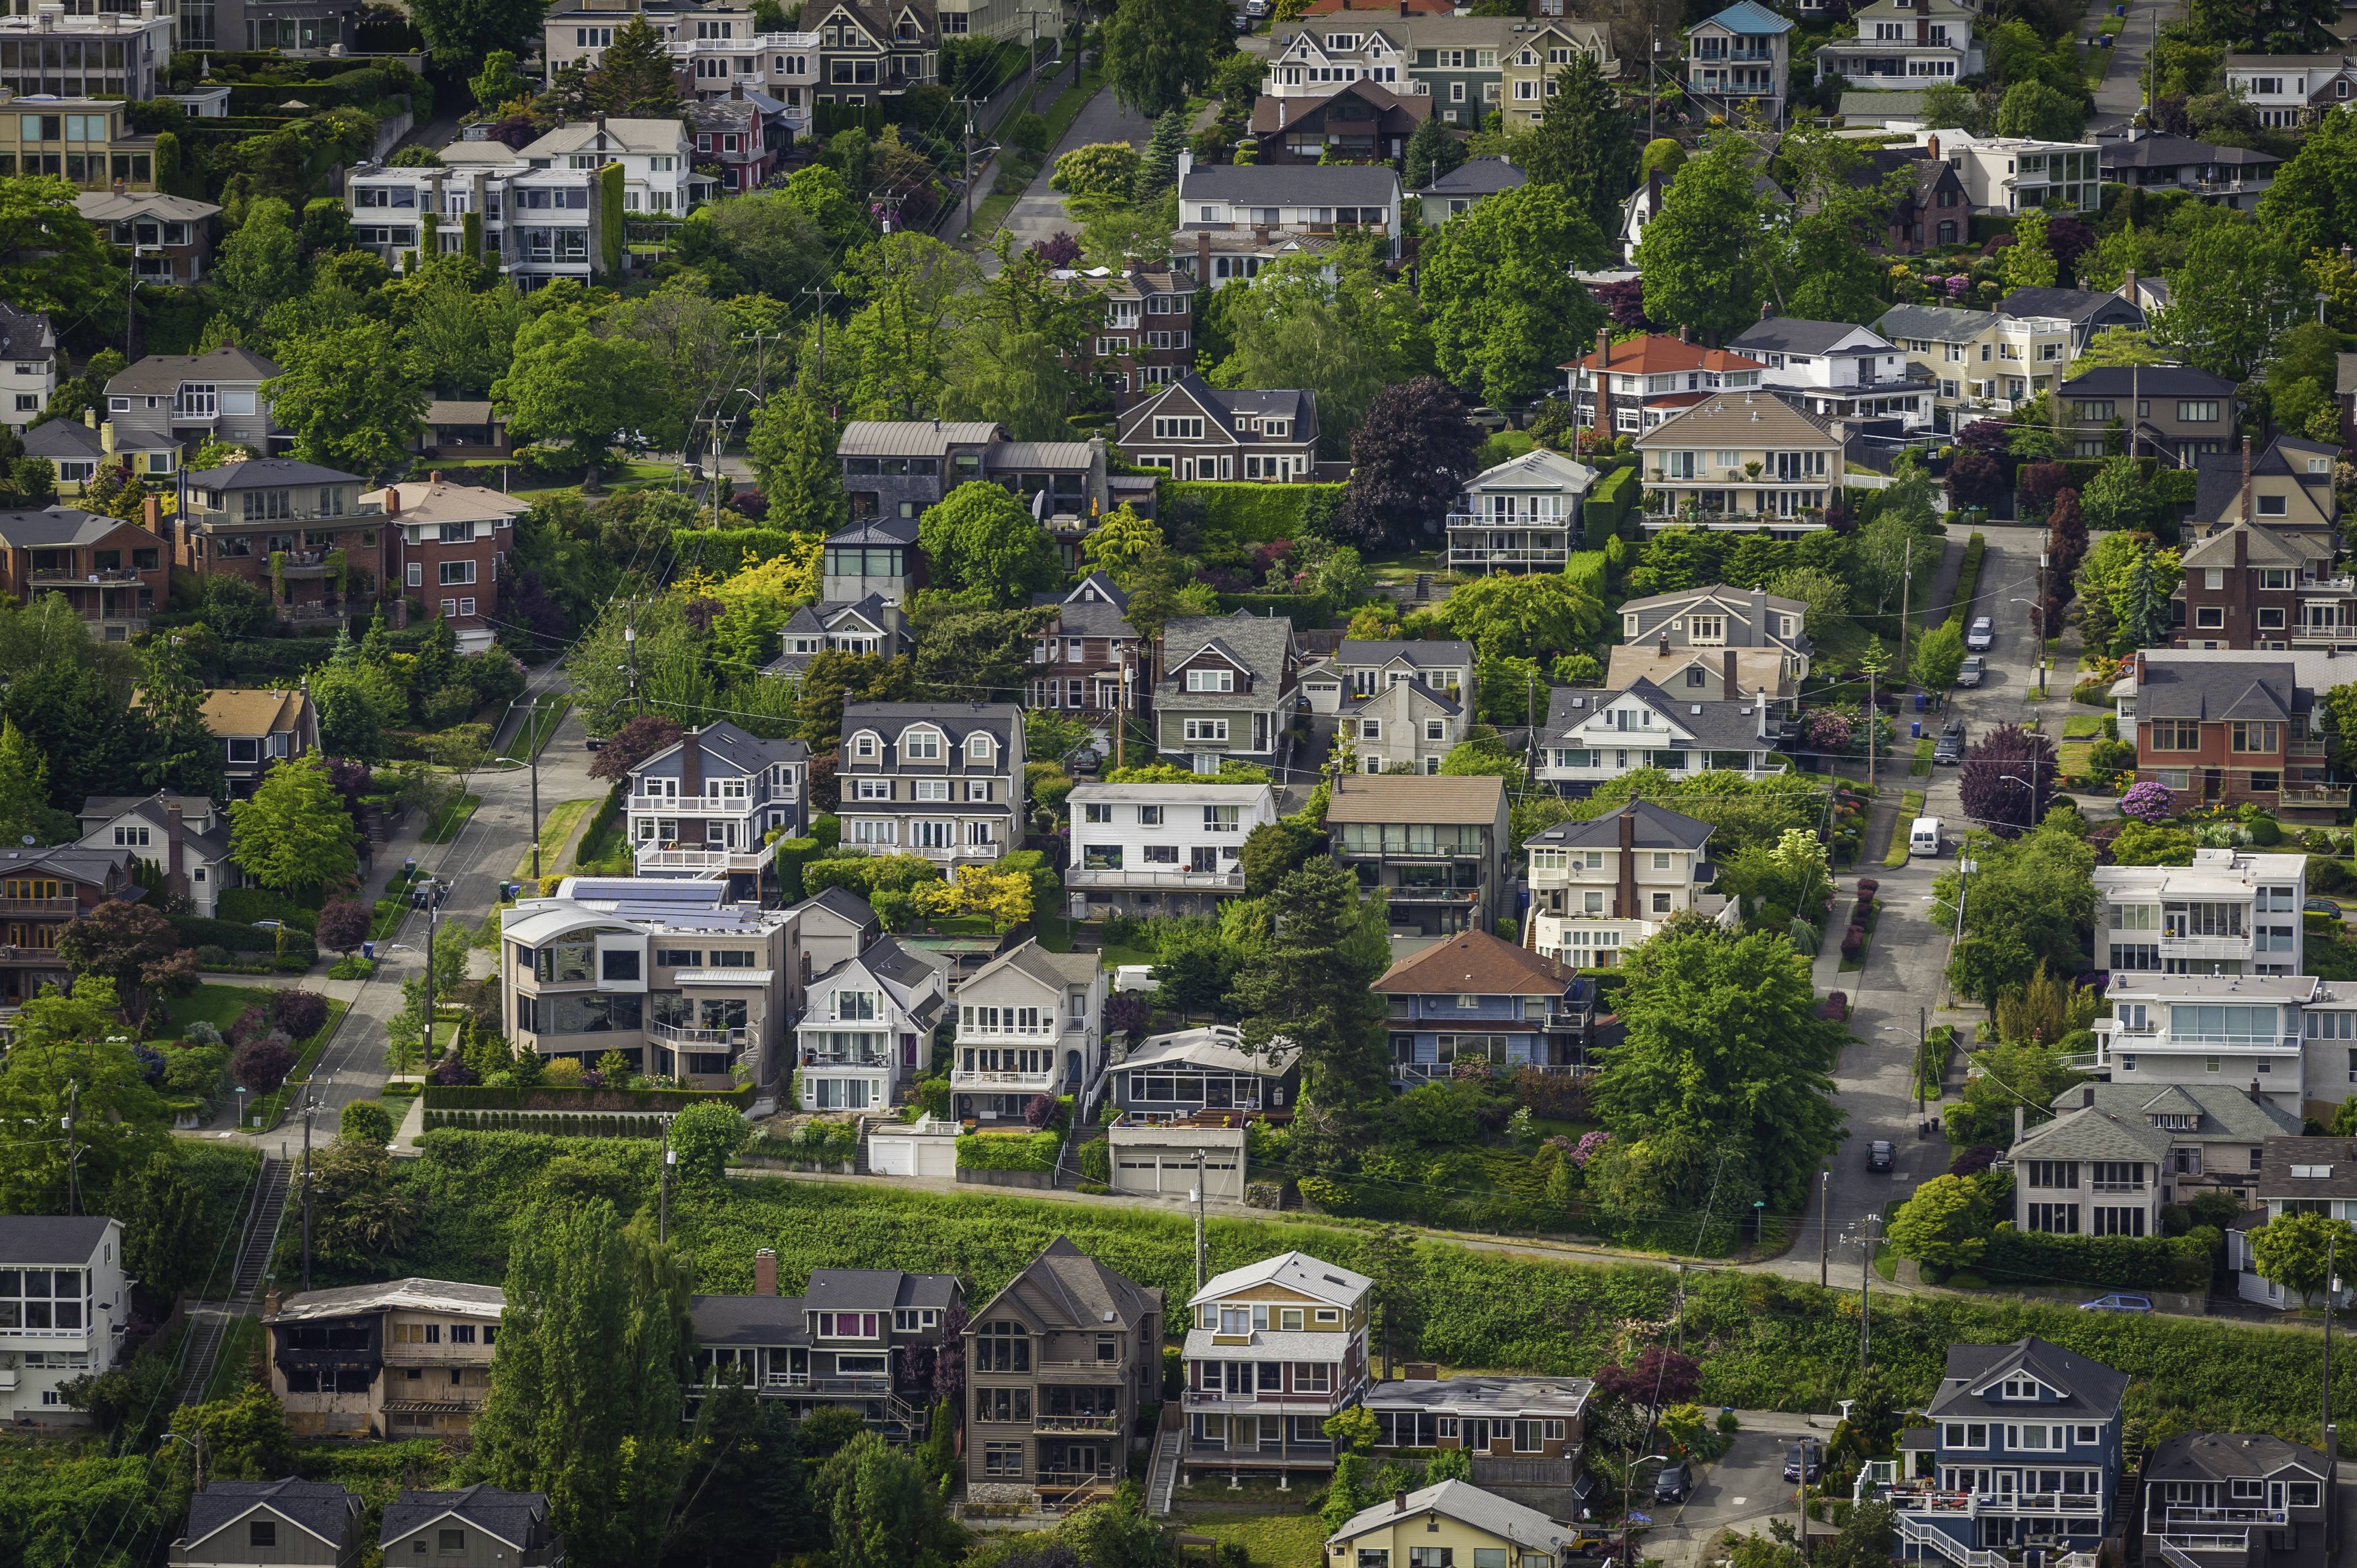 How to Get Your Hillside House Retrofitted for Earthquakes